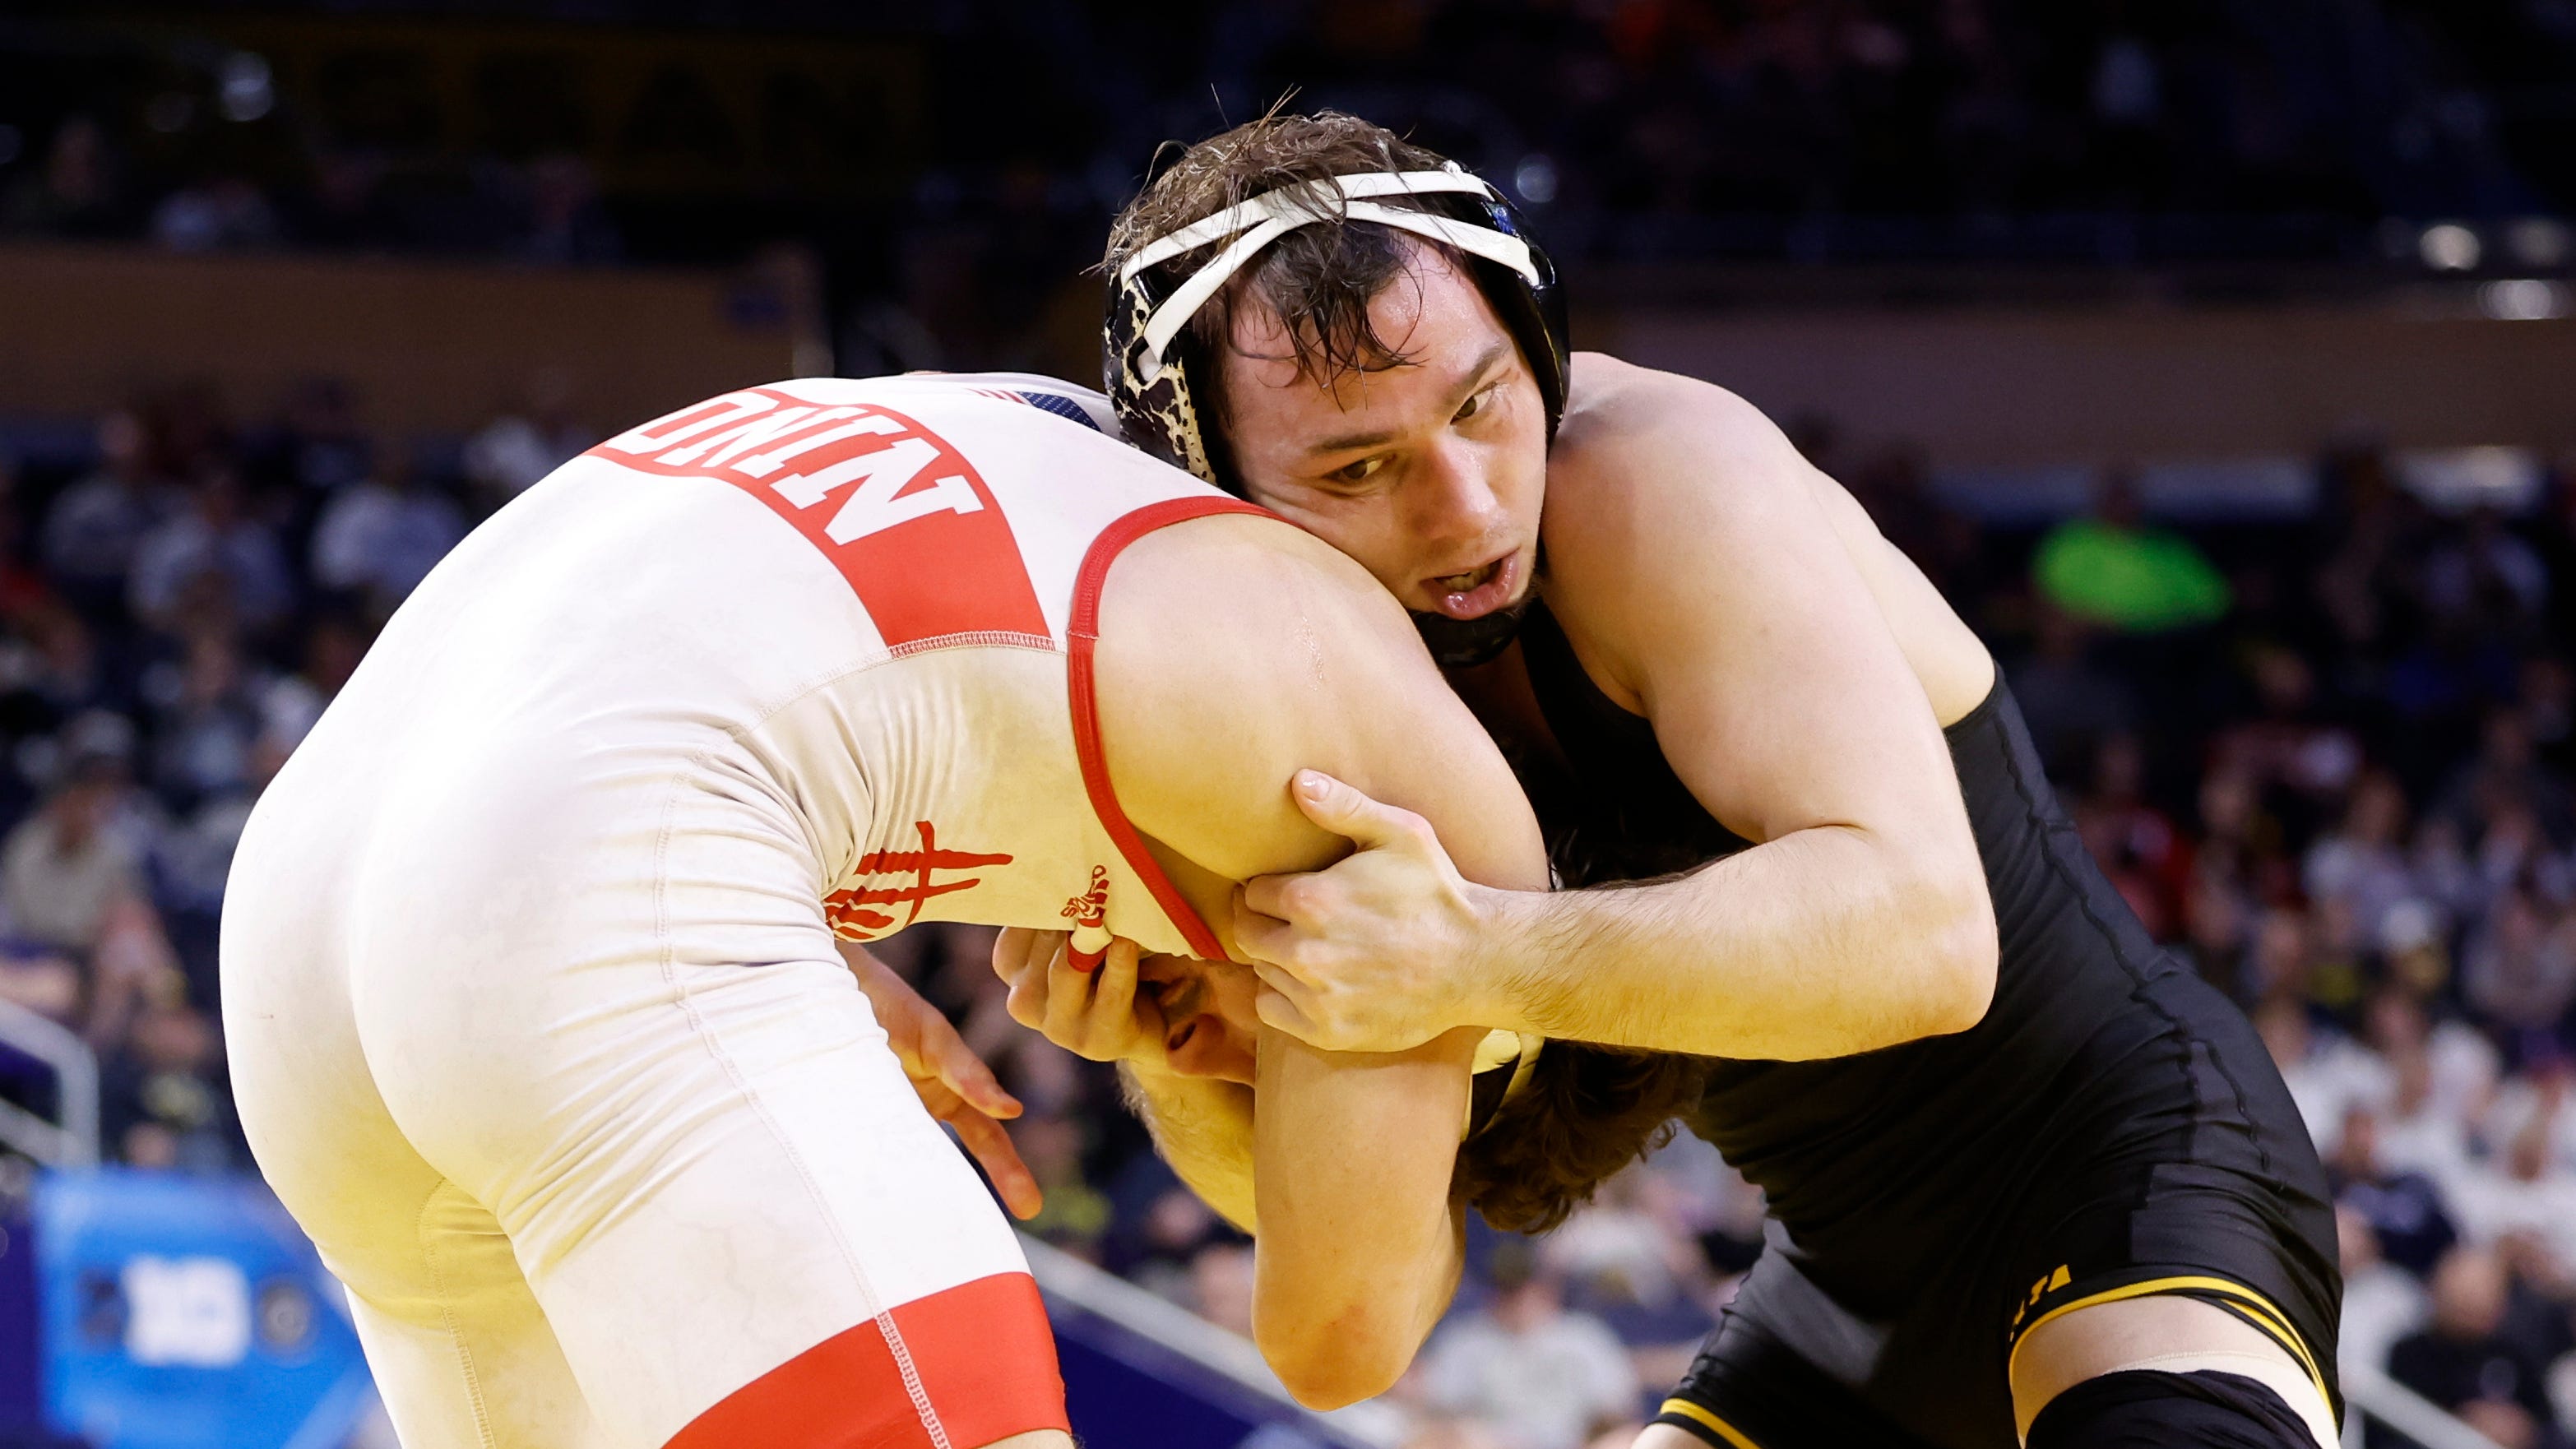 Iowa wrestler Spencer Lee will chase a fourth NCAA title this week